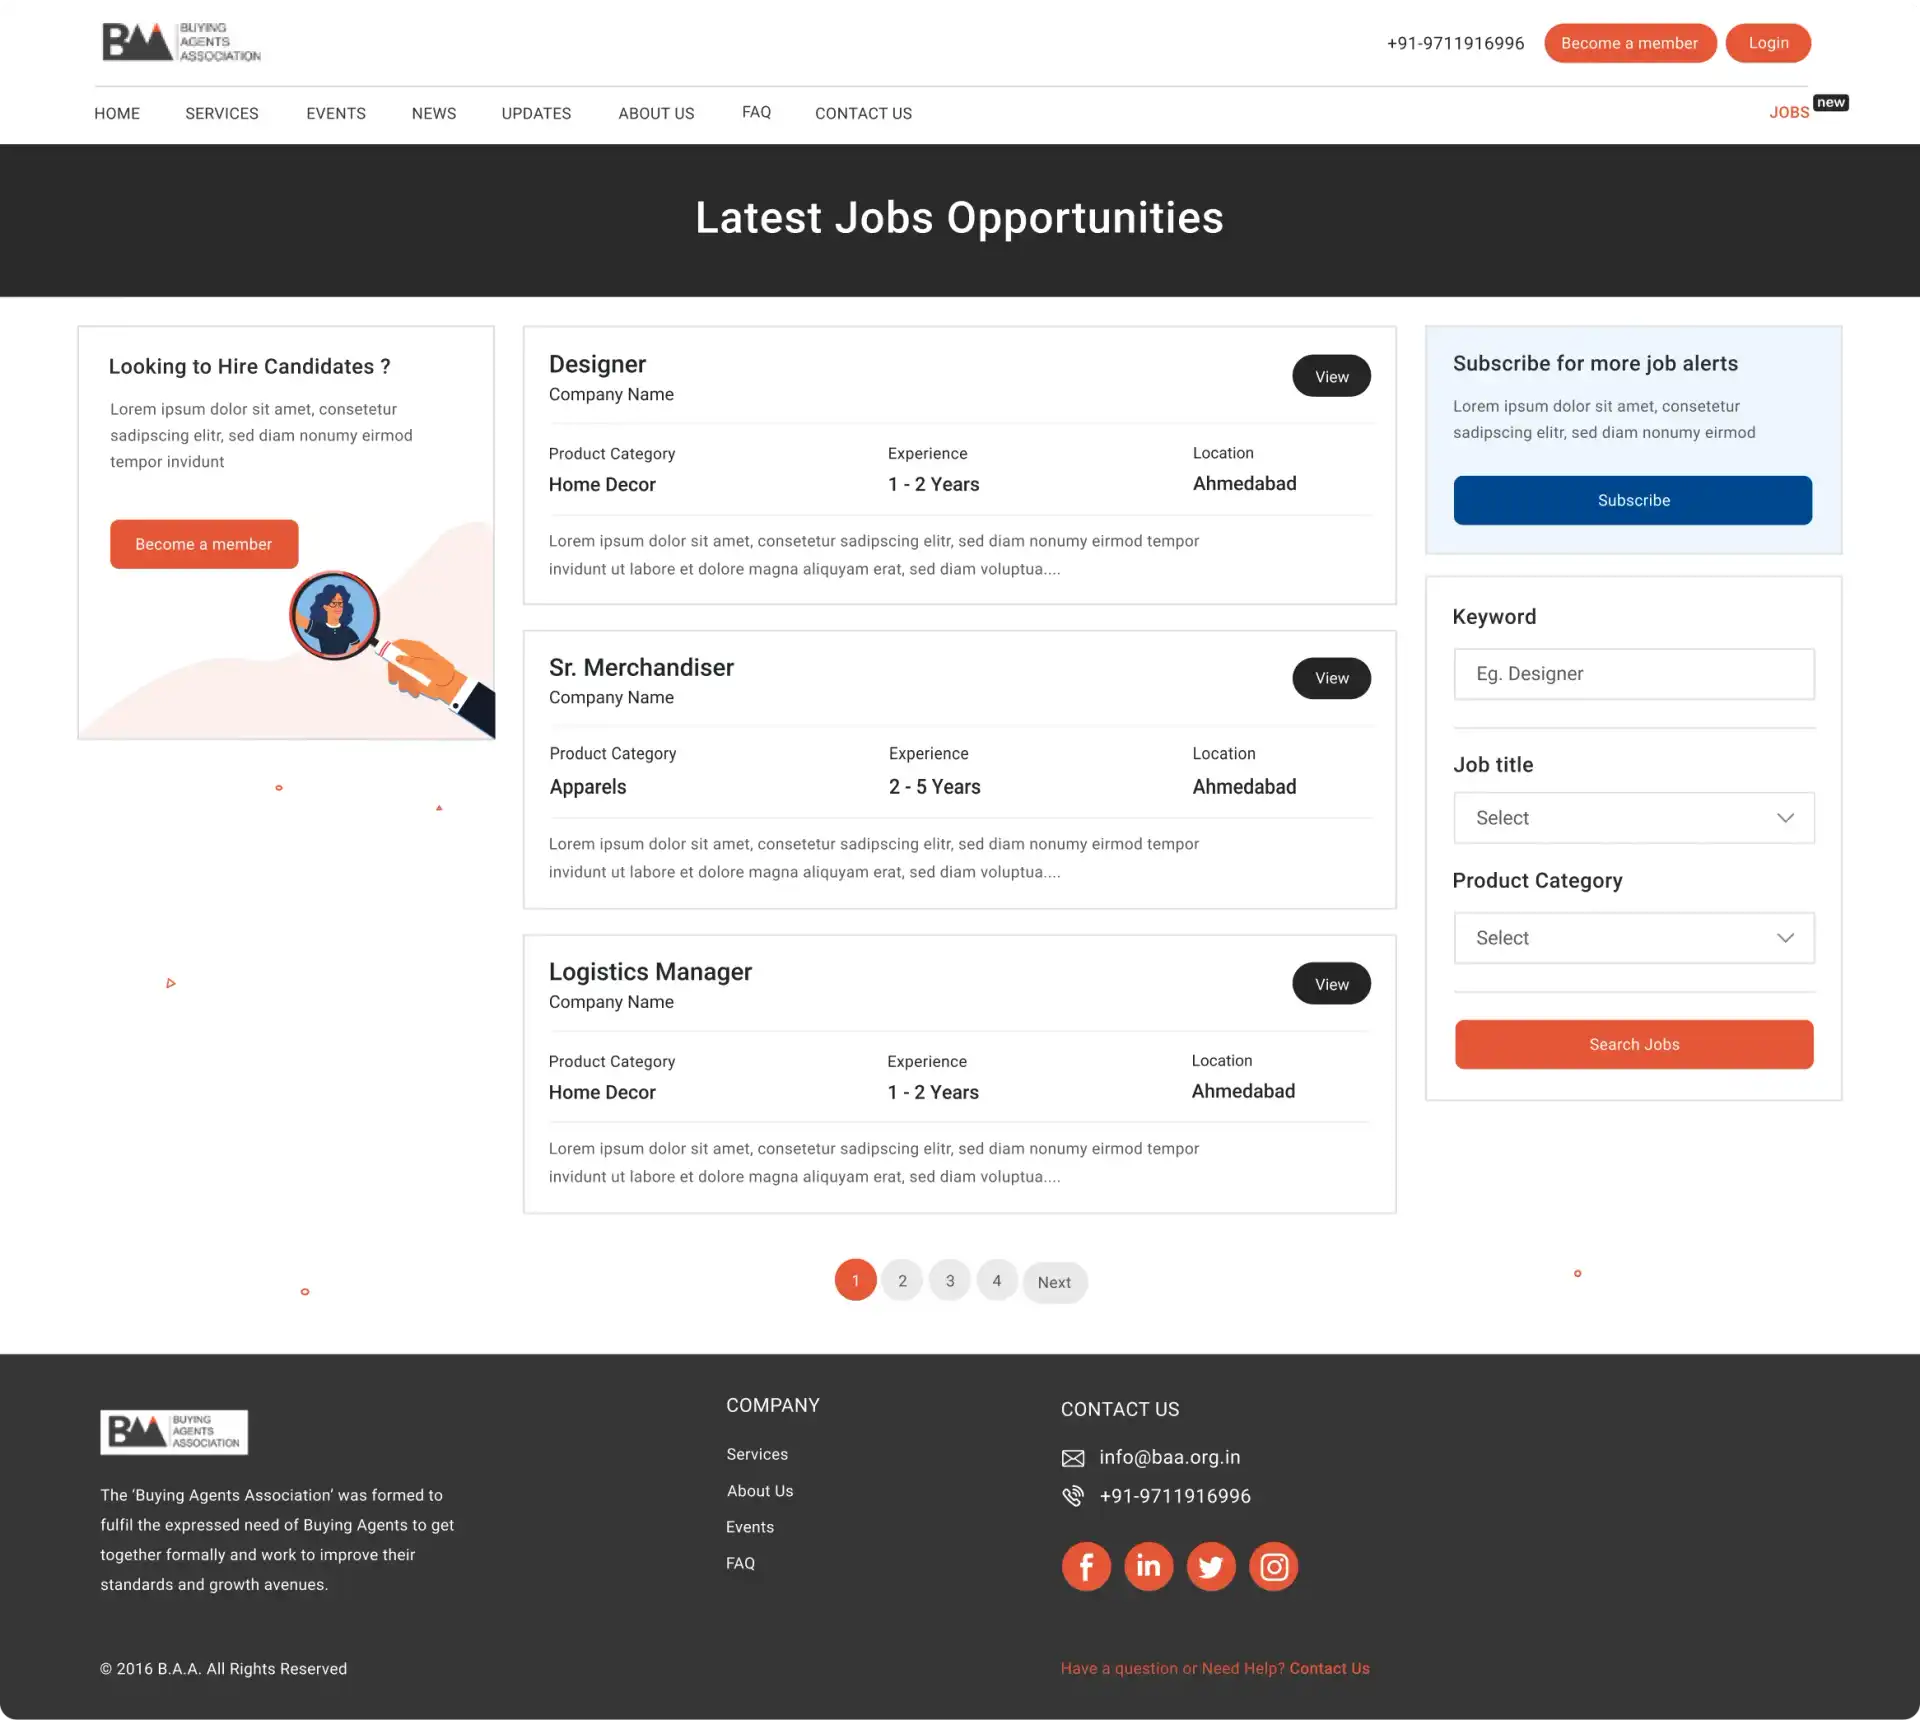 UI screen to view latest job opportunities